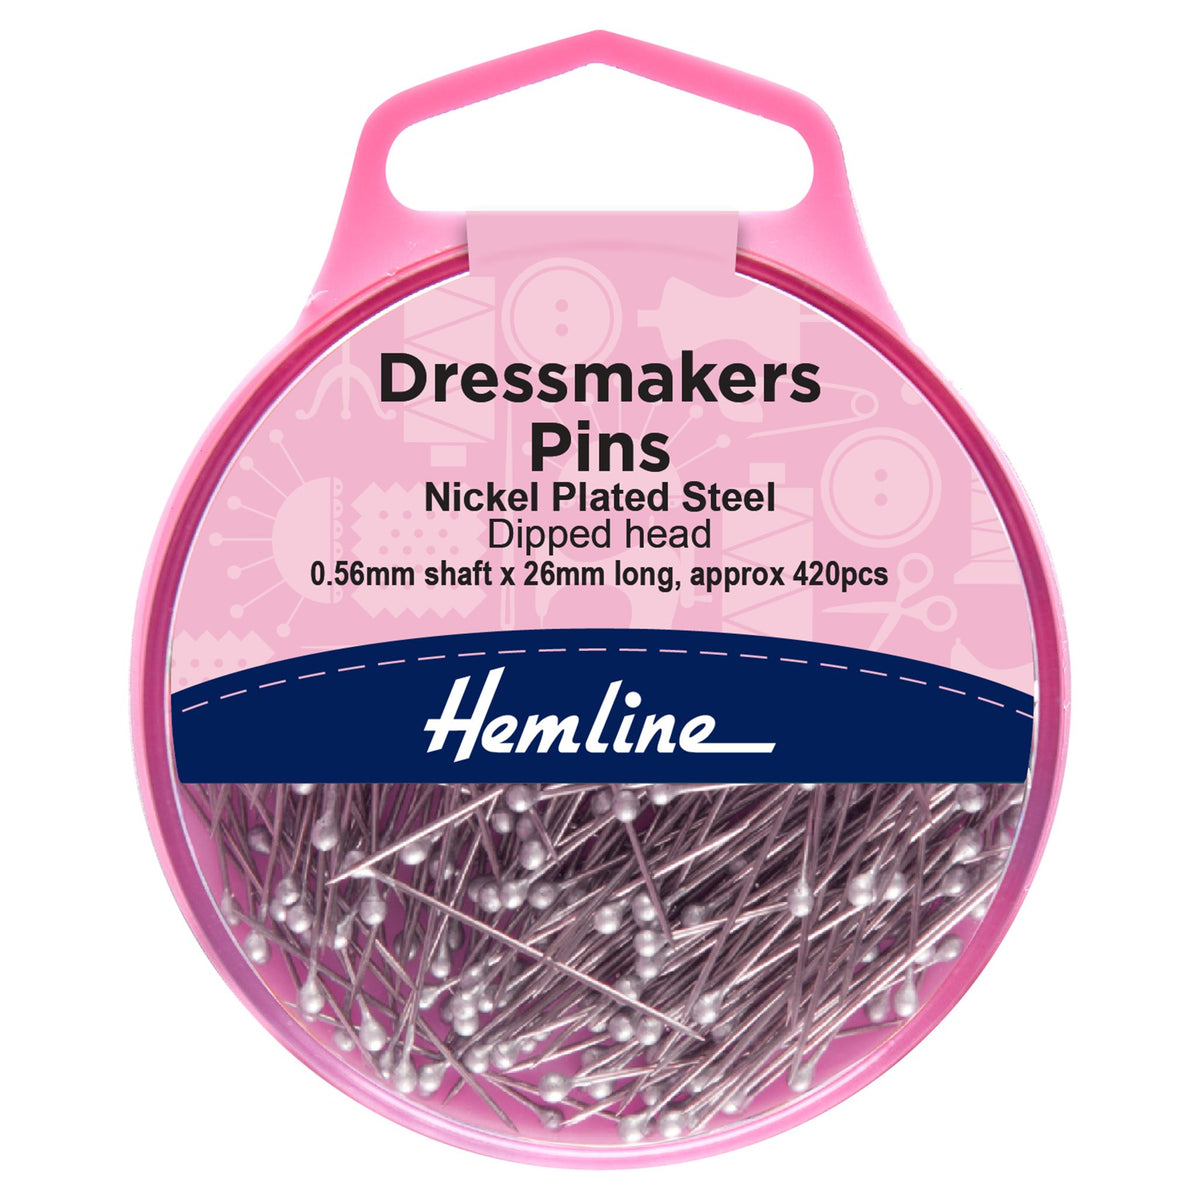 Dressmakers Dipped Head Pins - 0.56mm x 26mm (420 Pieces)